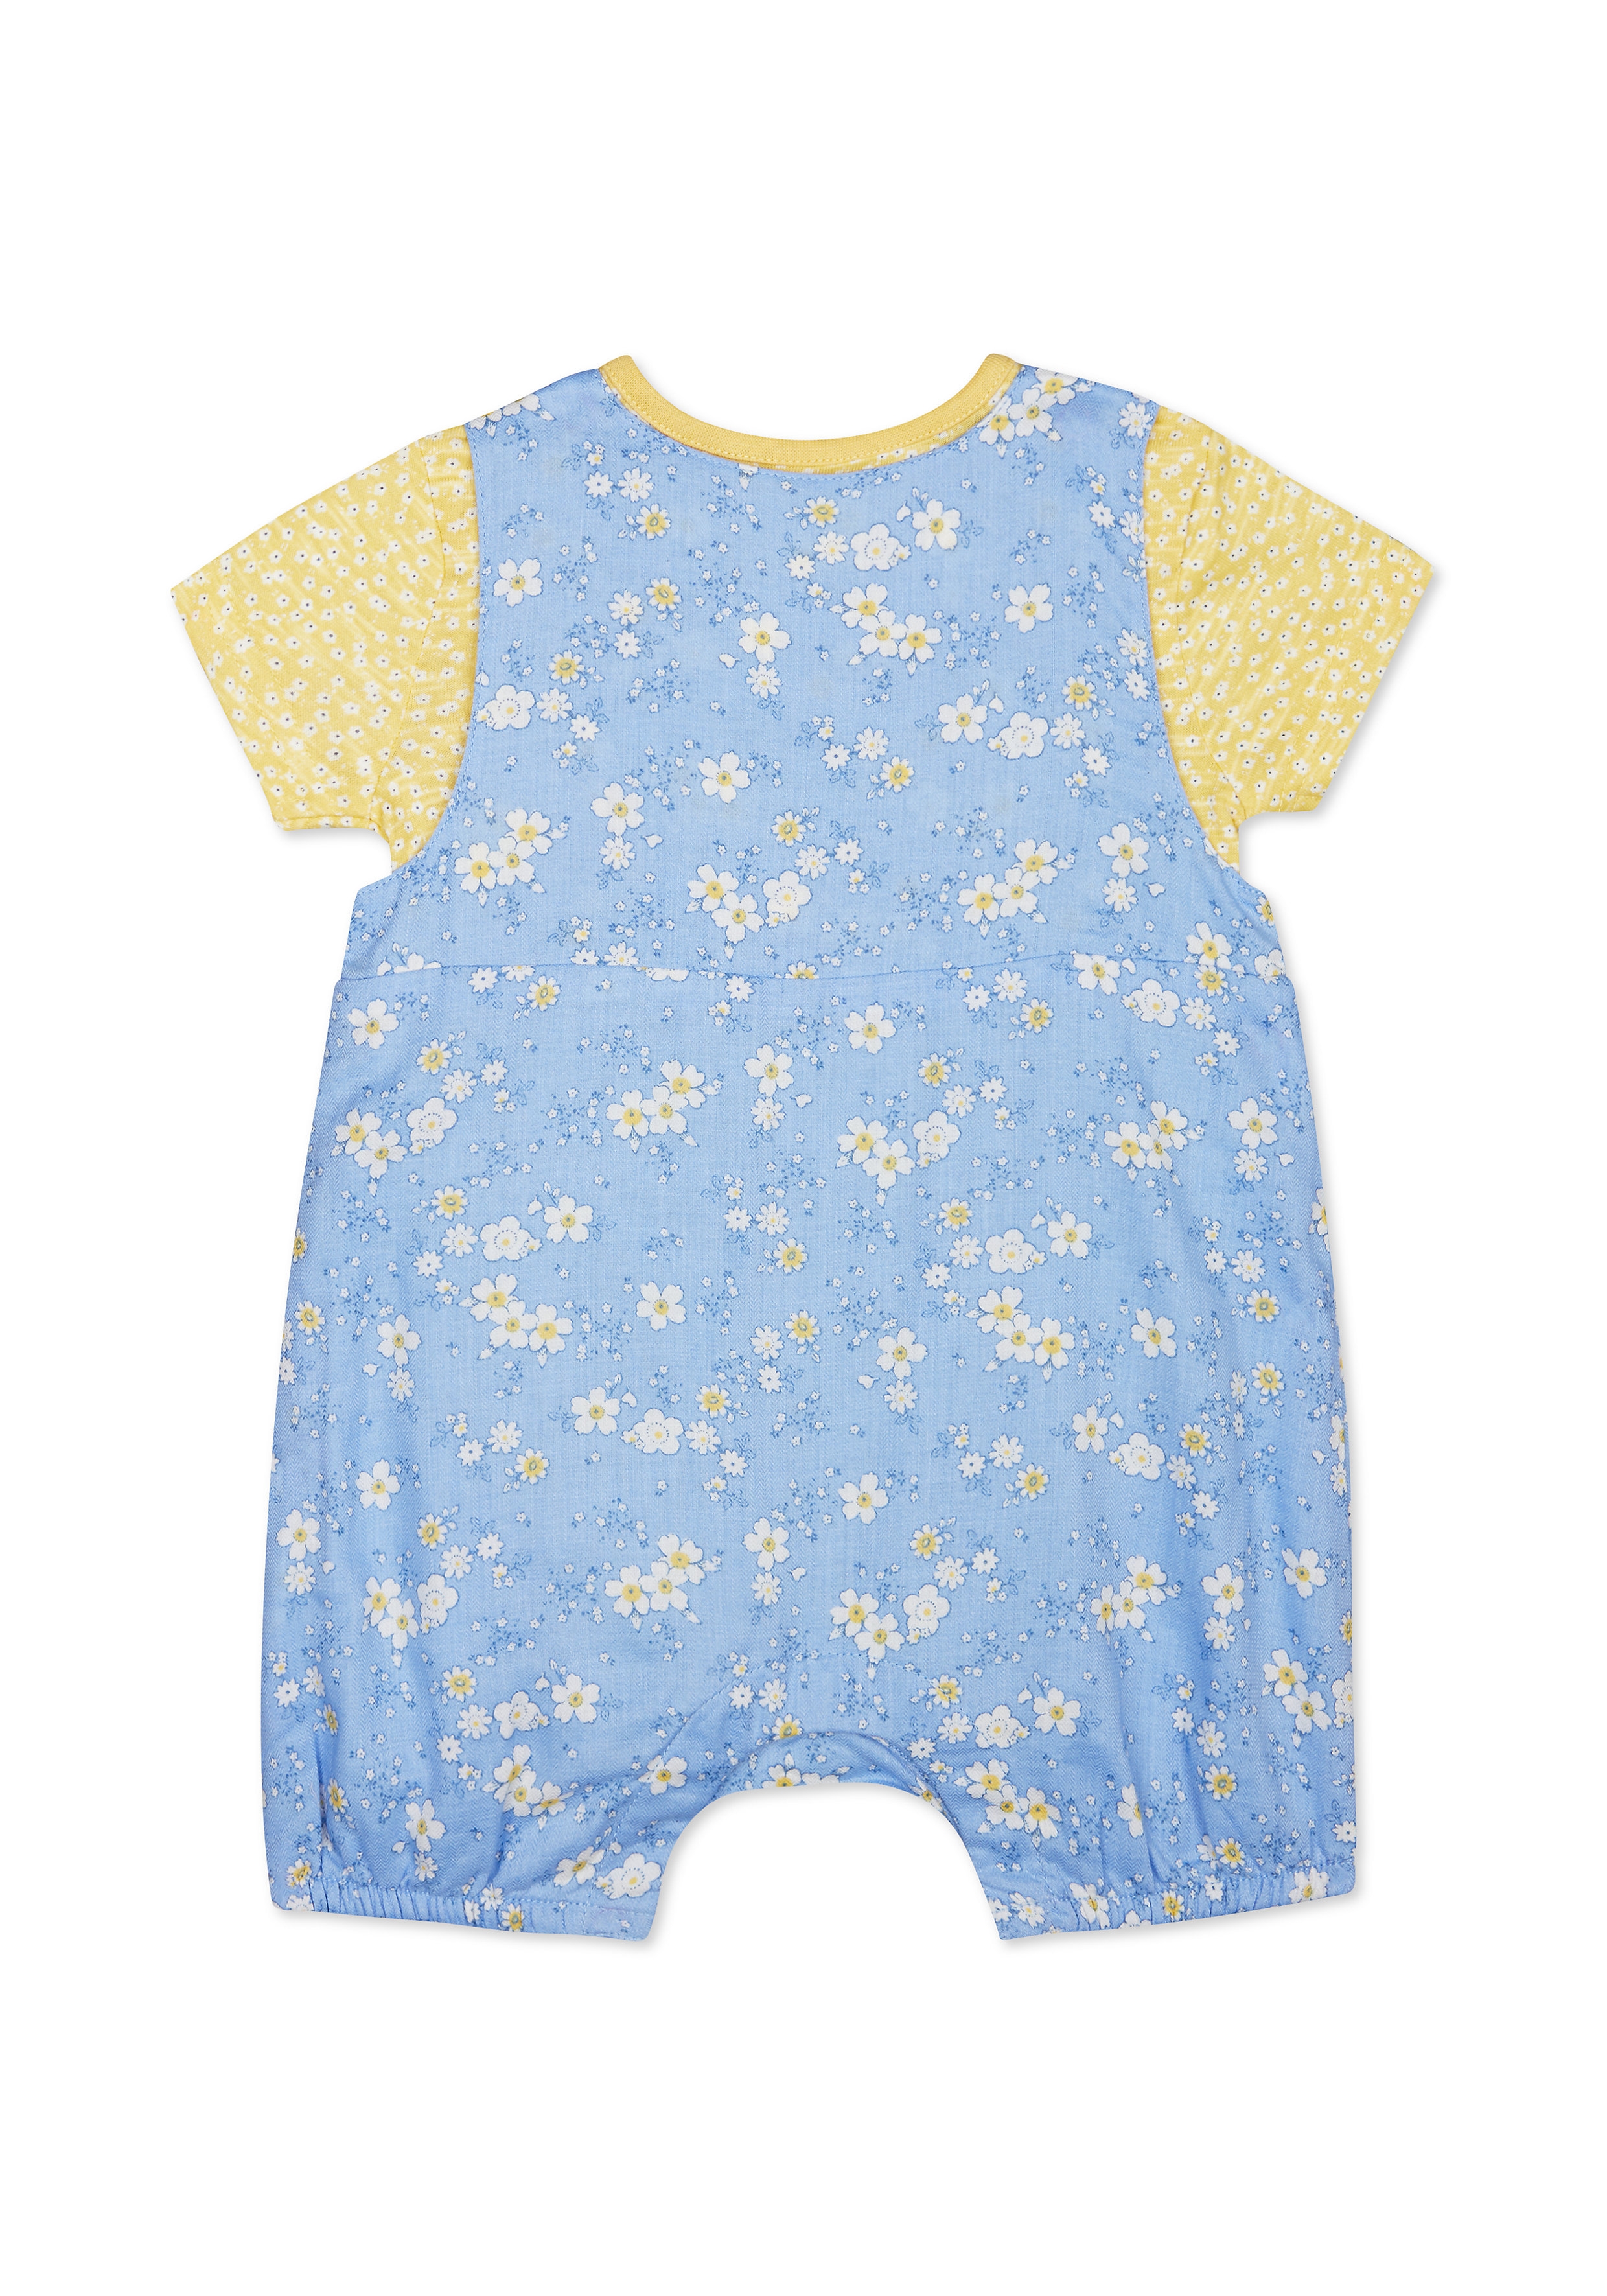 Mothercare | Girls Half Sleeves Dungaree Set Floral Print - Blue Yellow 1